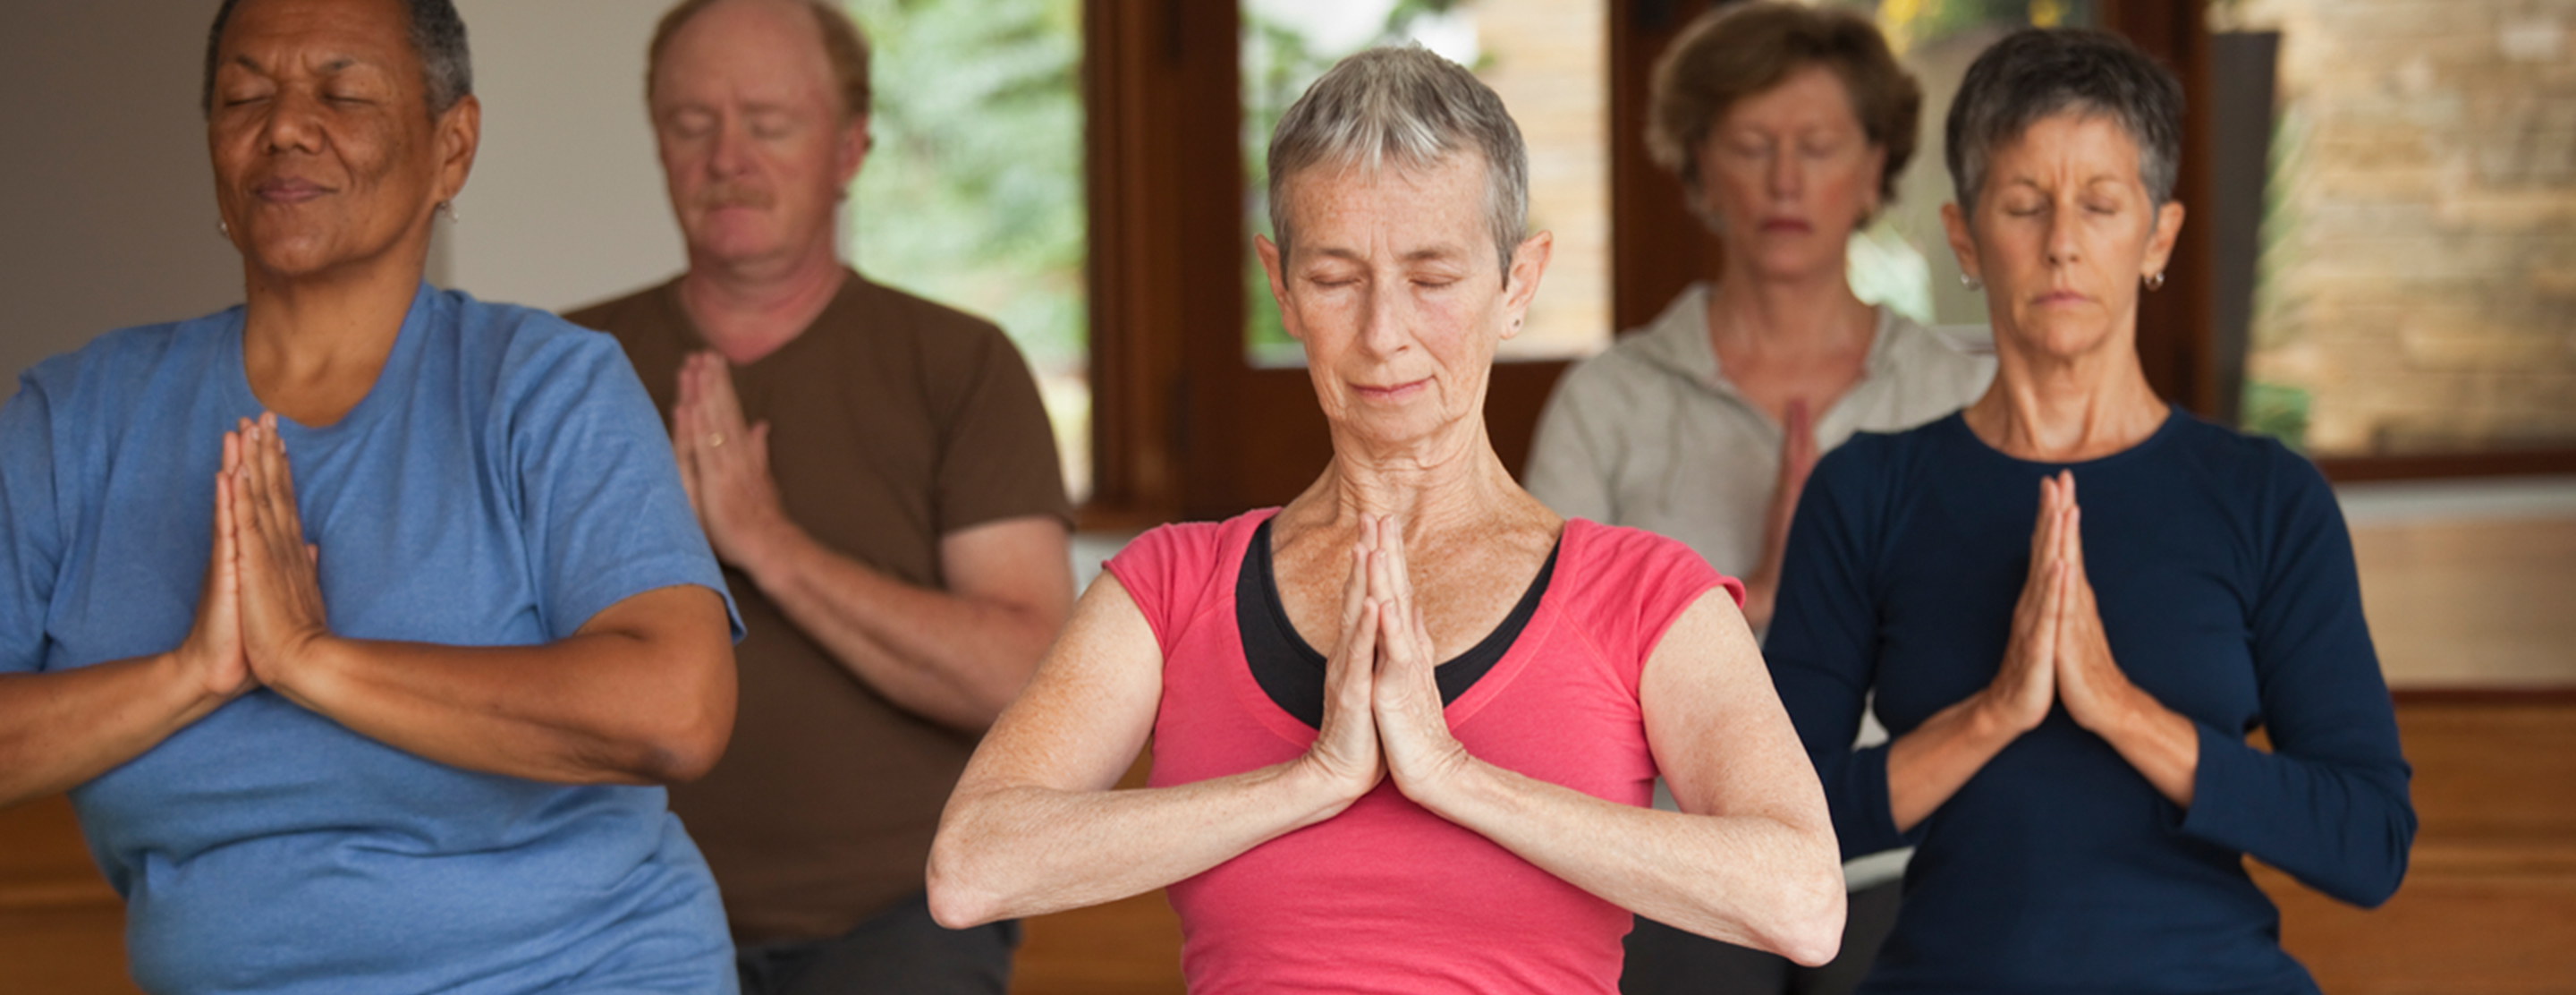 Meditation & Guided Imagery for Cancer Patients